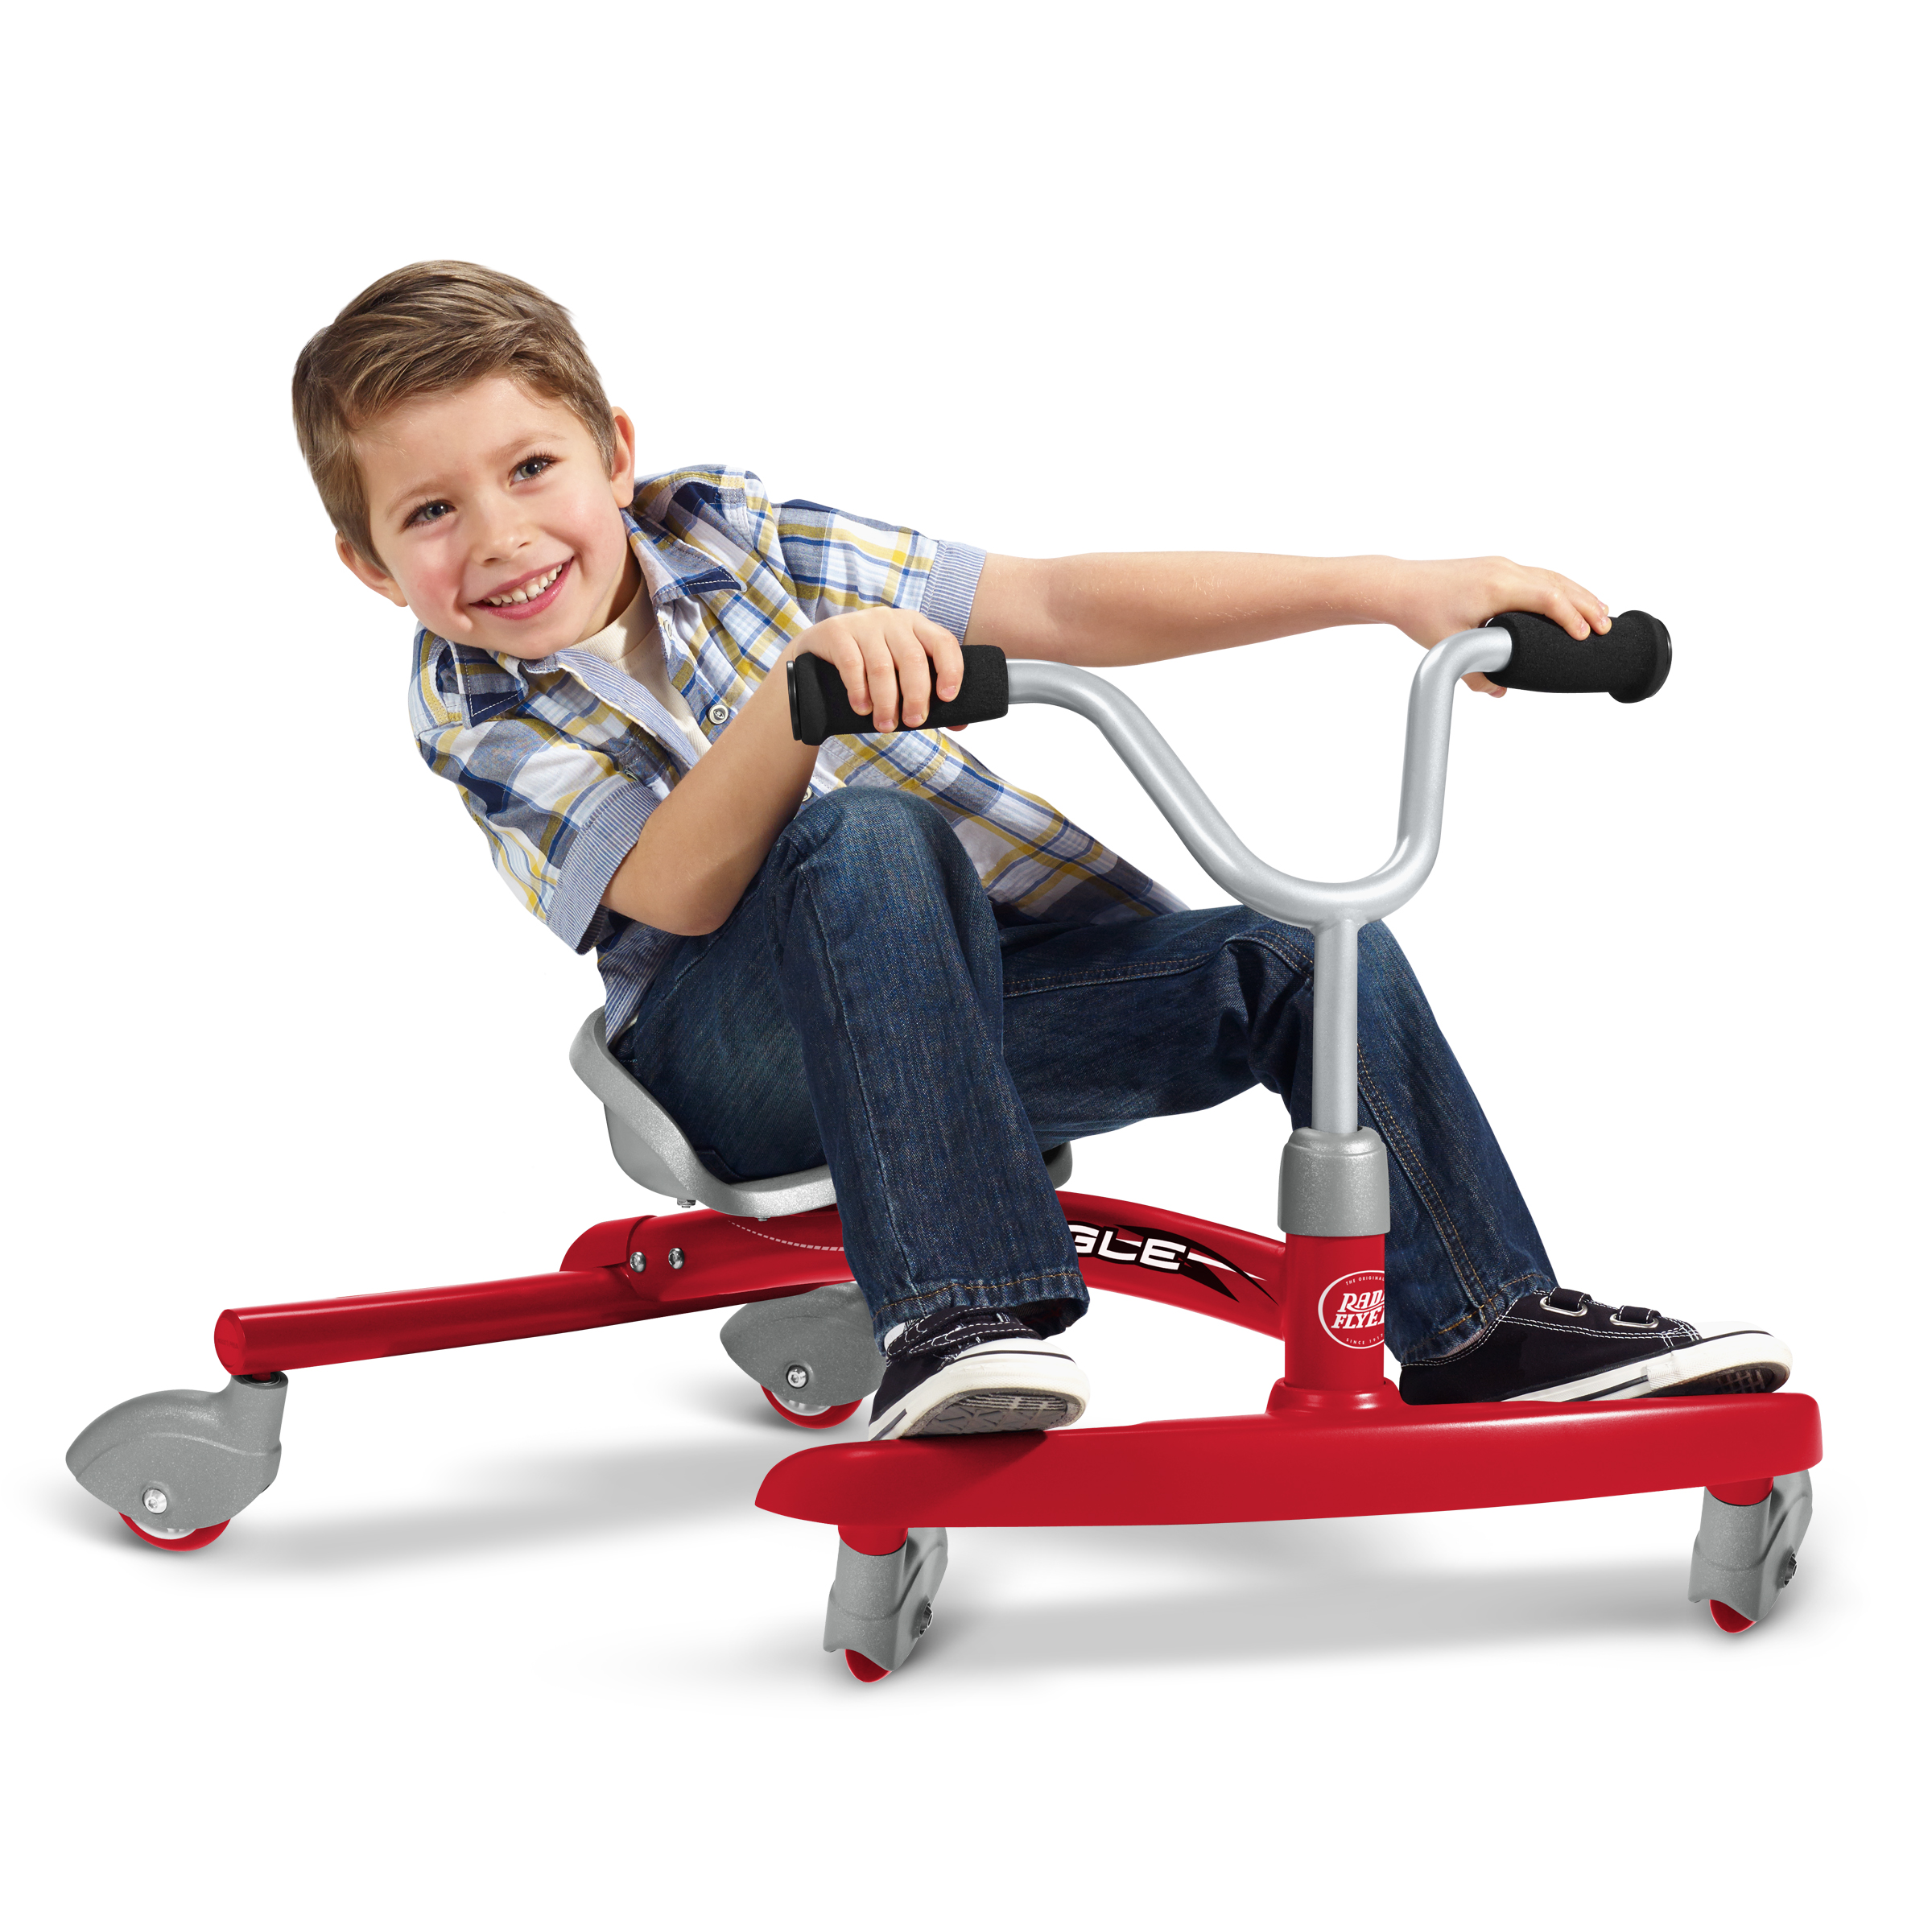 Radio Flyer, Ziggle, Caster Ride-on for Kids, 360 Degree Spins, Red - image 1 of 5